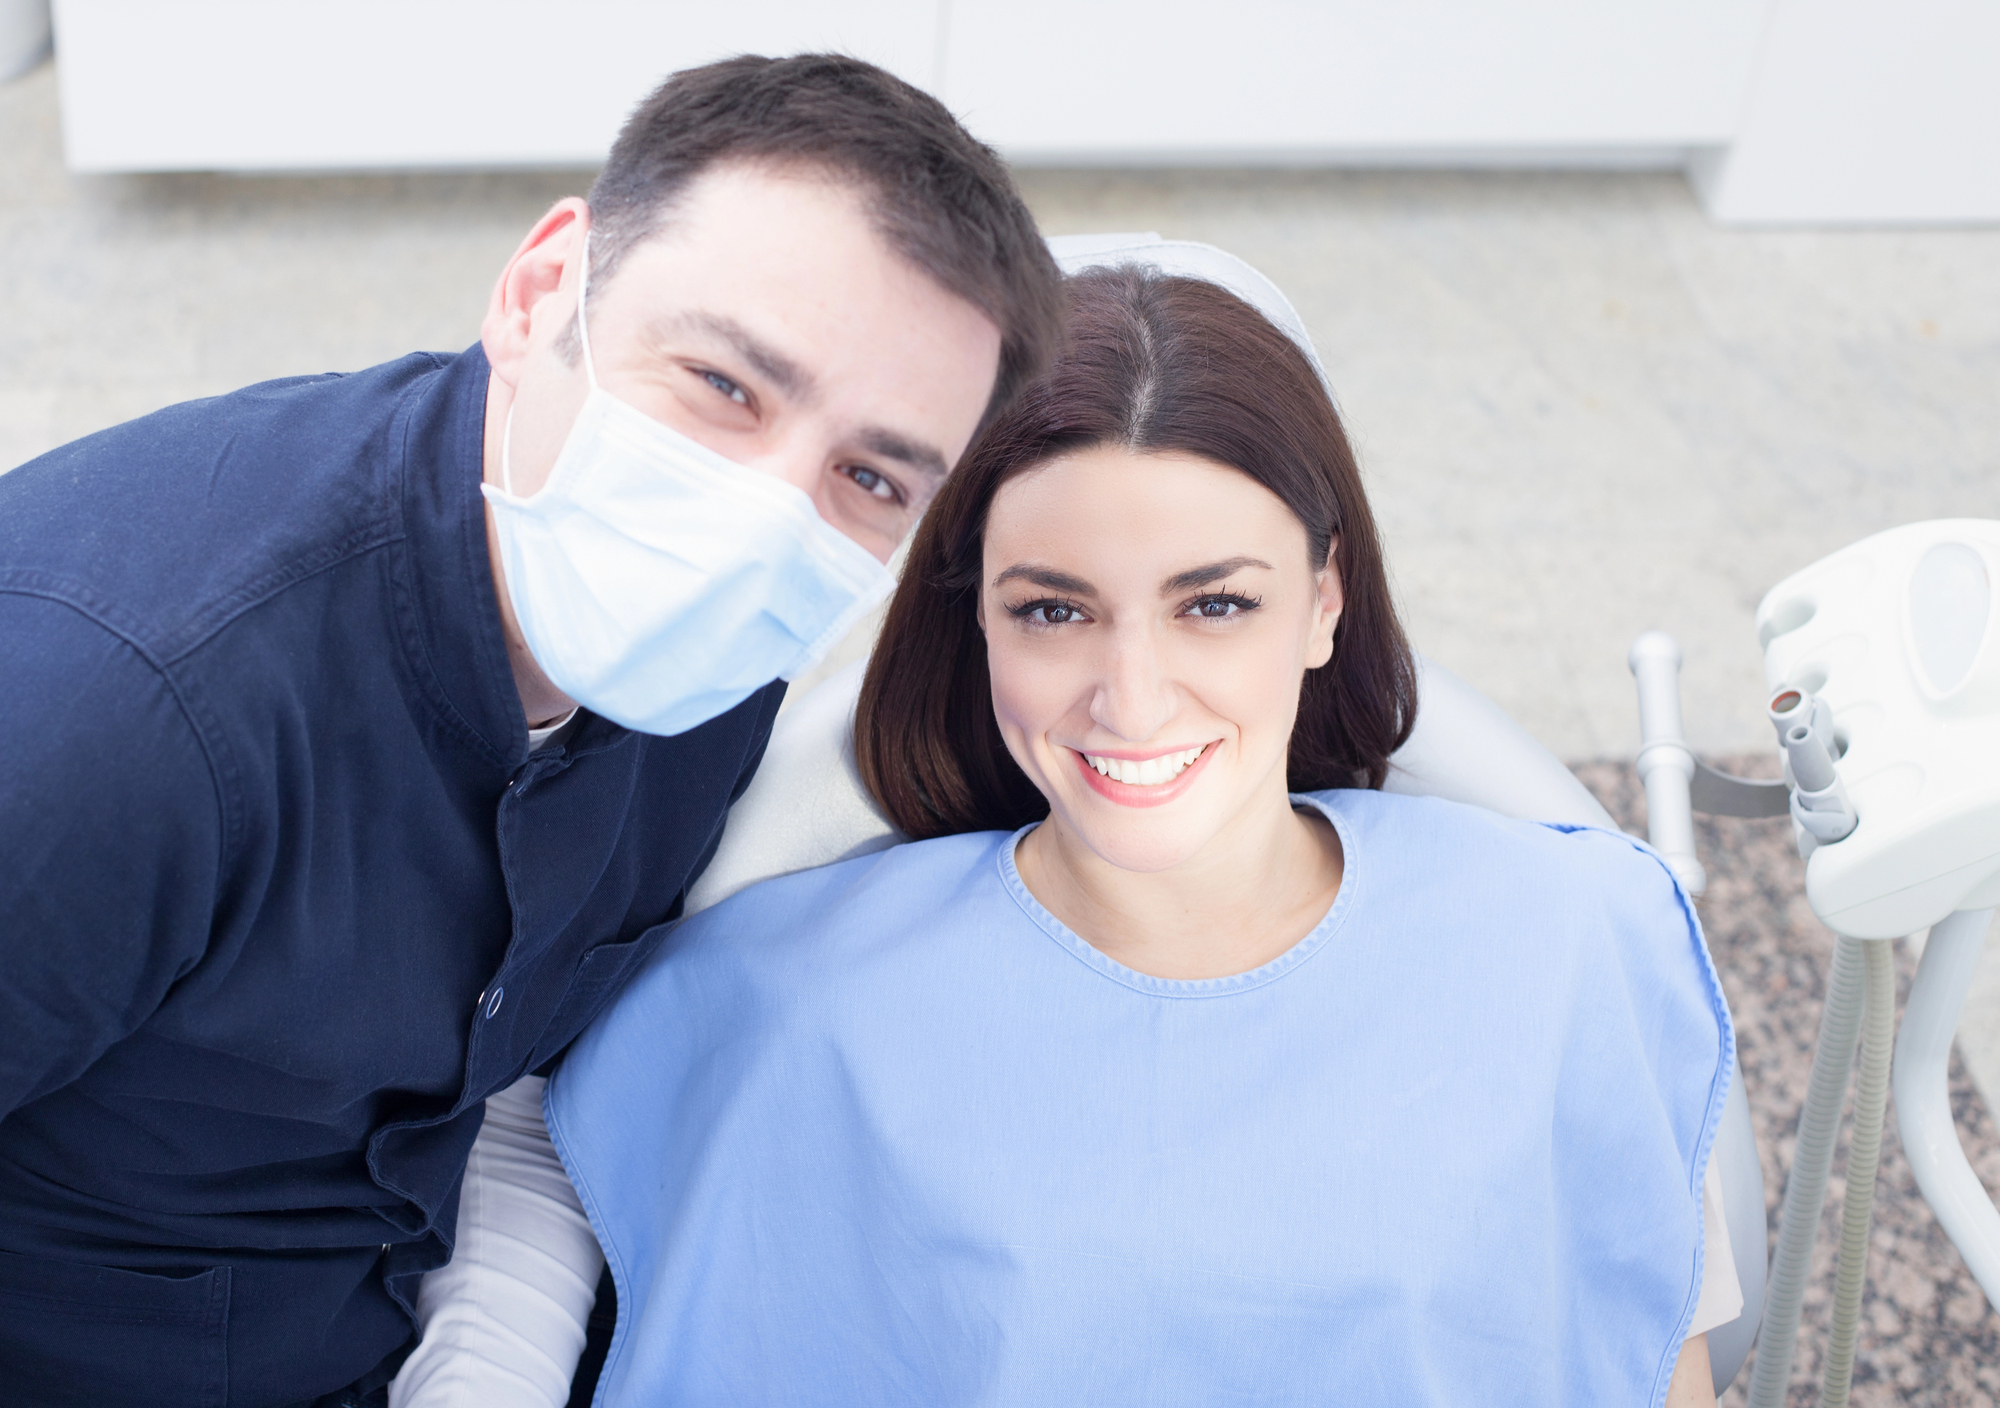 How much does dental fillings cost typically?